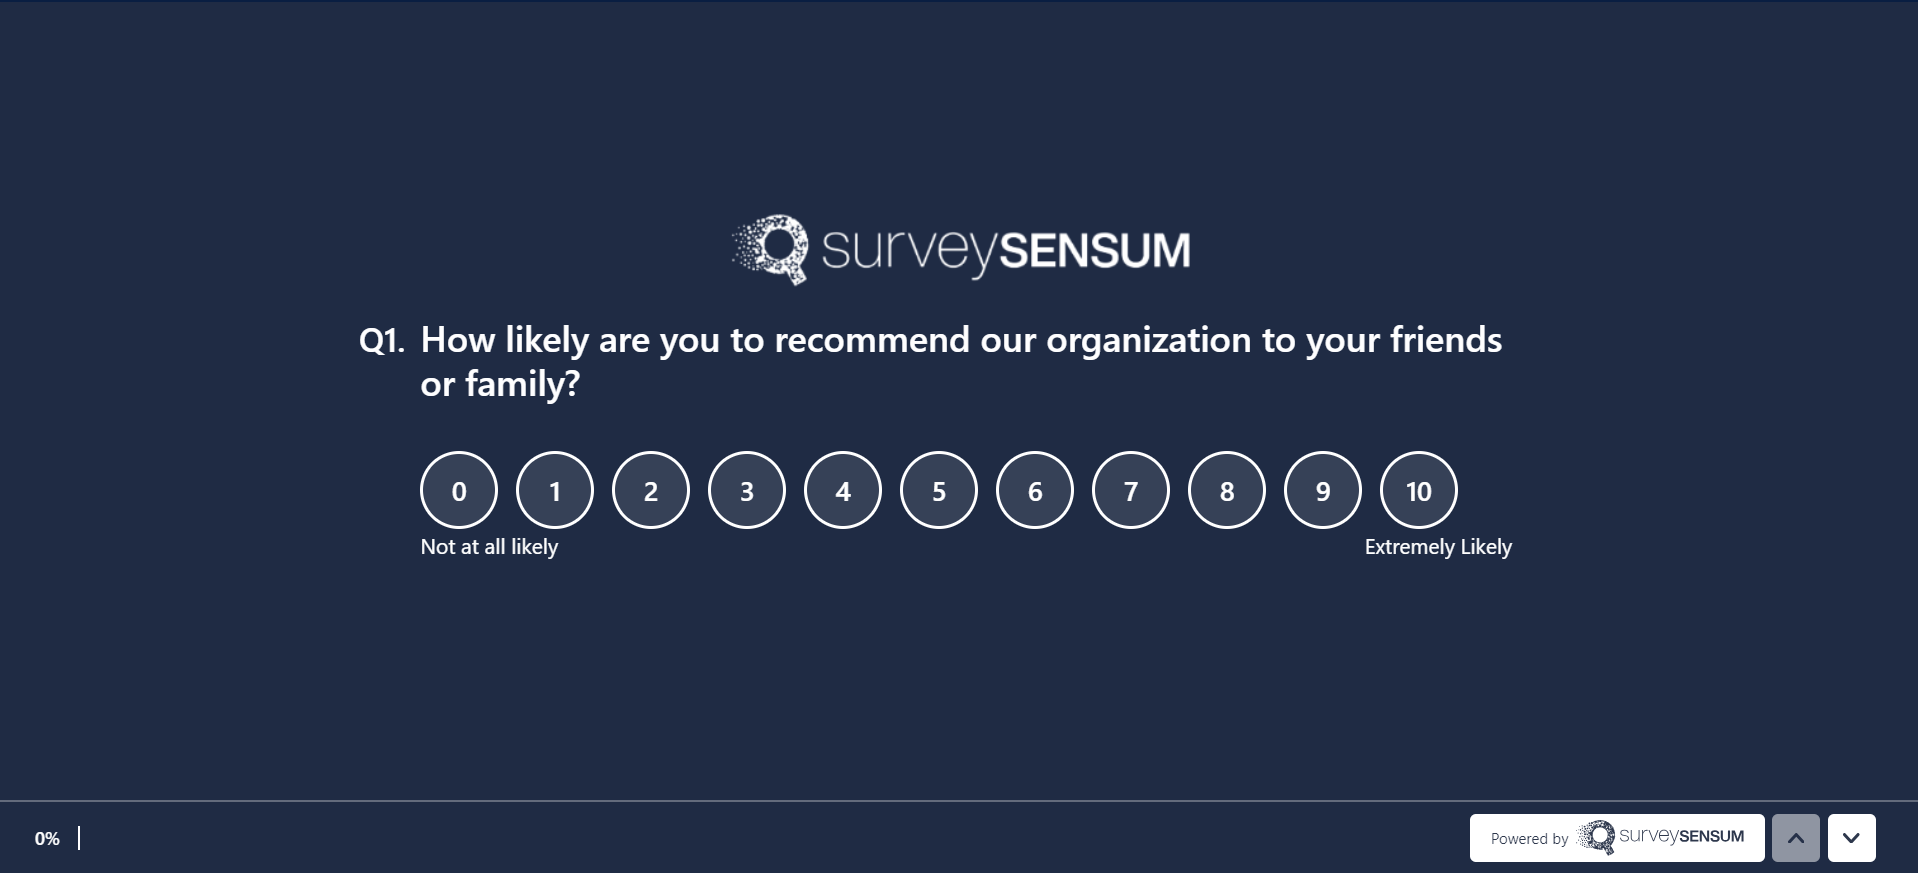 This is the image of an eNPS survey where employees are being asked to rate their likelihood of recommending the organization to friends and colleagues.